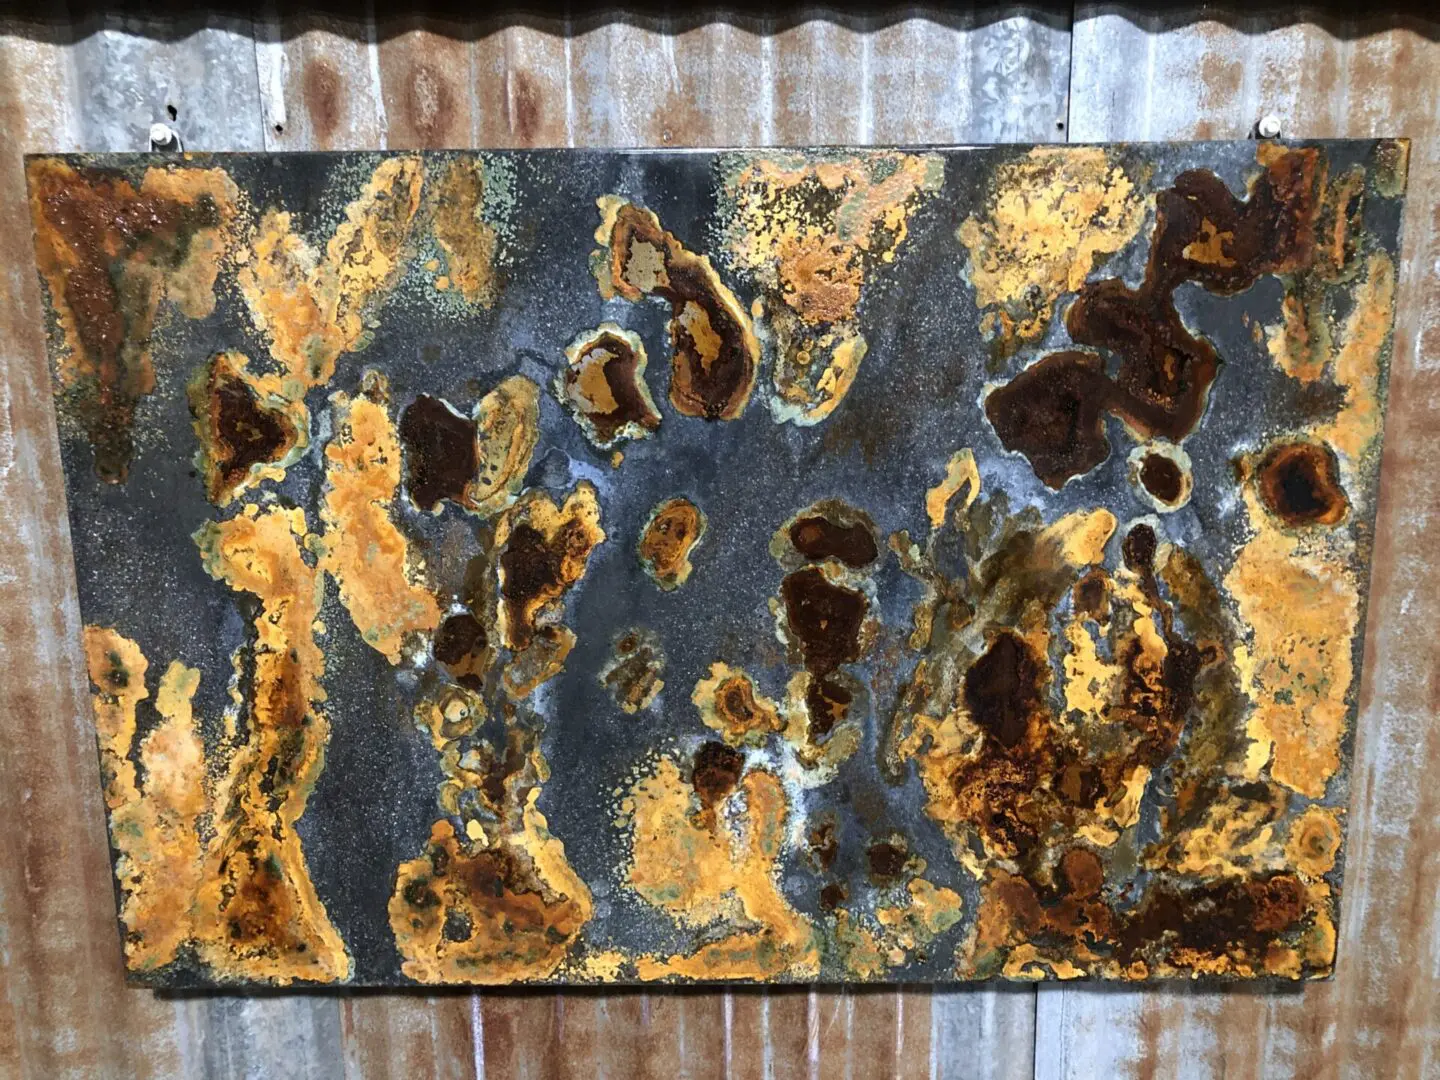 A very close shot of the Bubbling Rust Wall Art